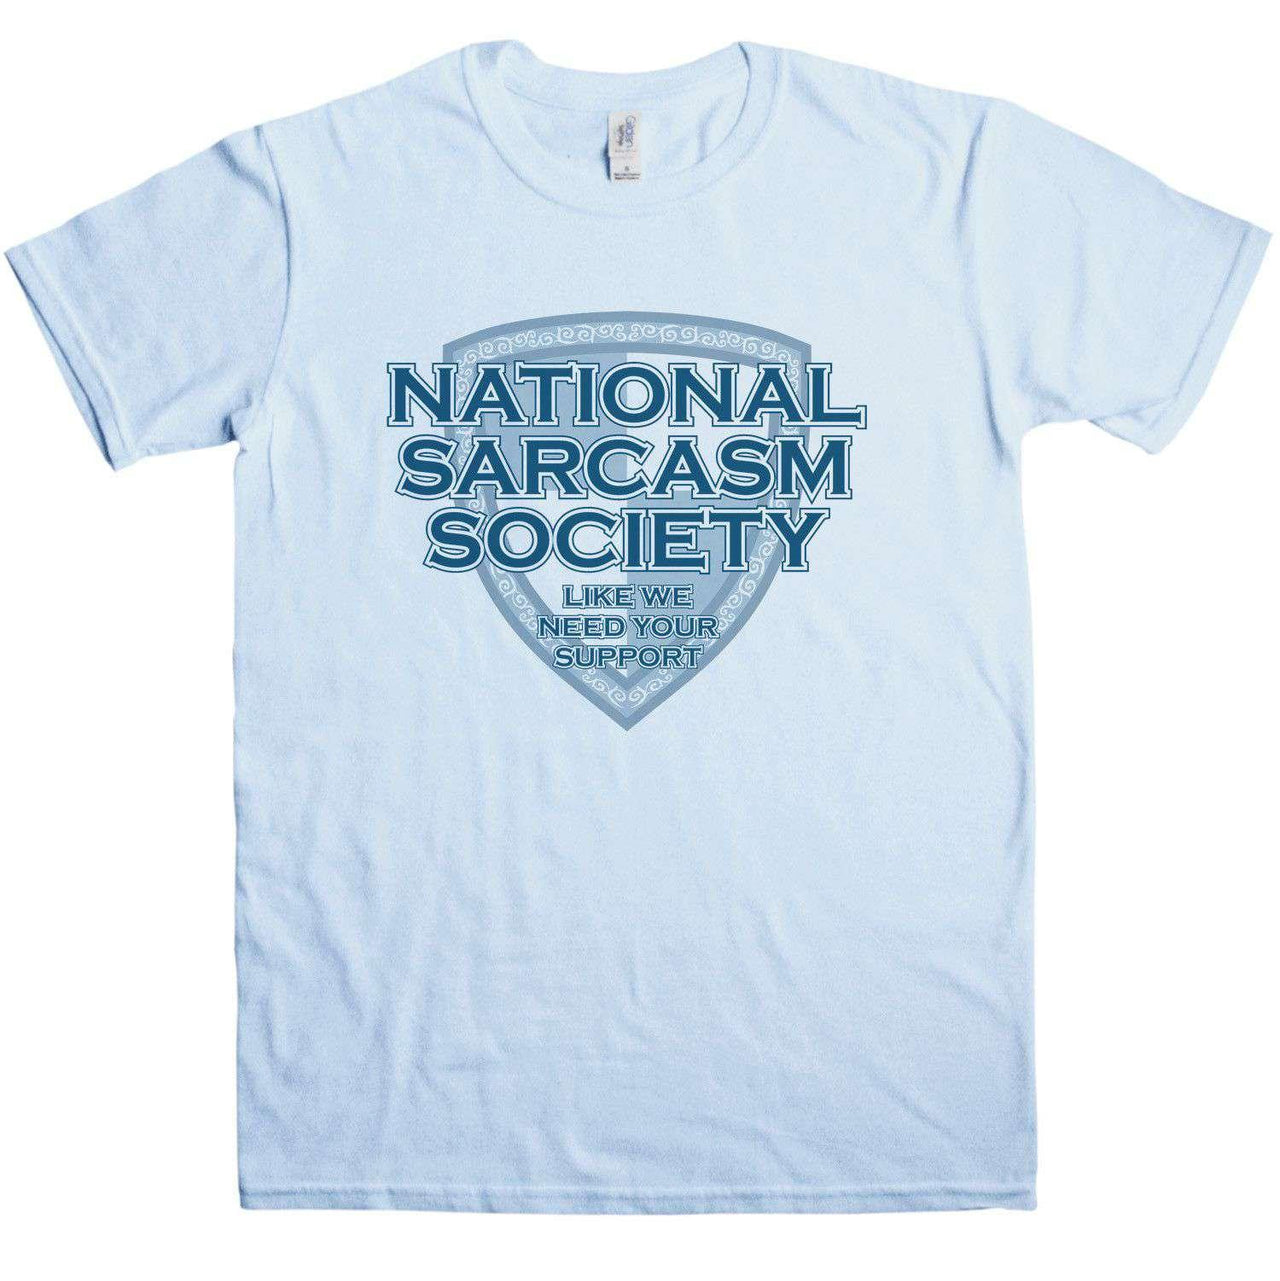 National Sarcasm Society Graphic T-Shirt For Men 8Ball